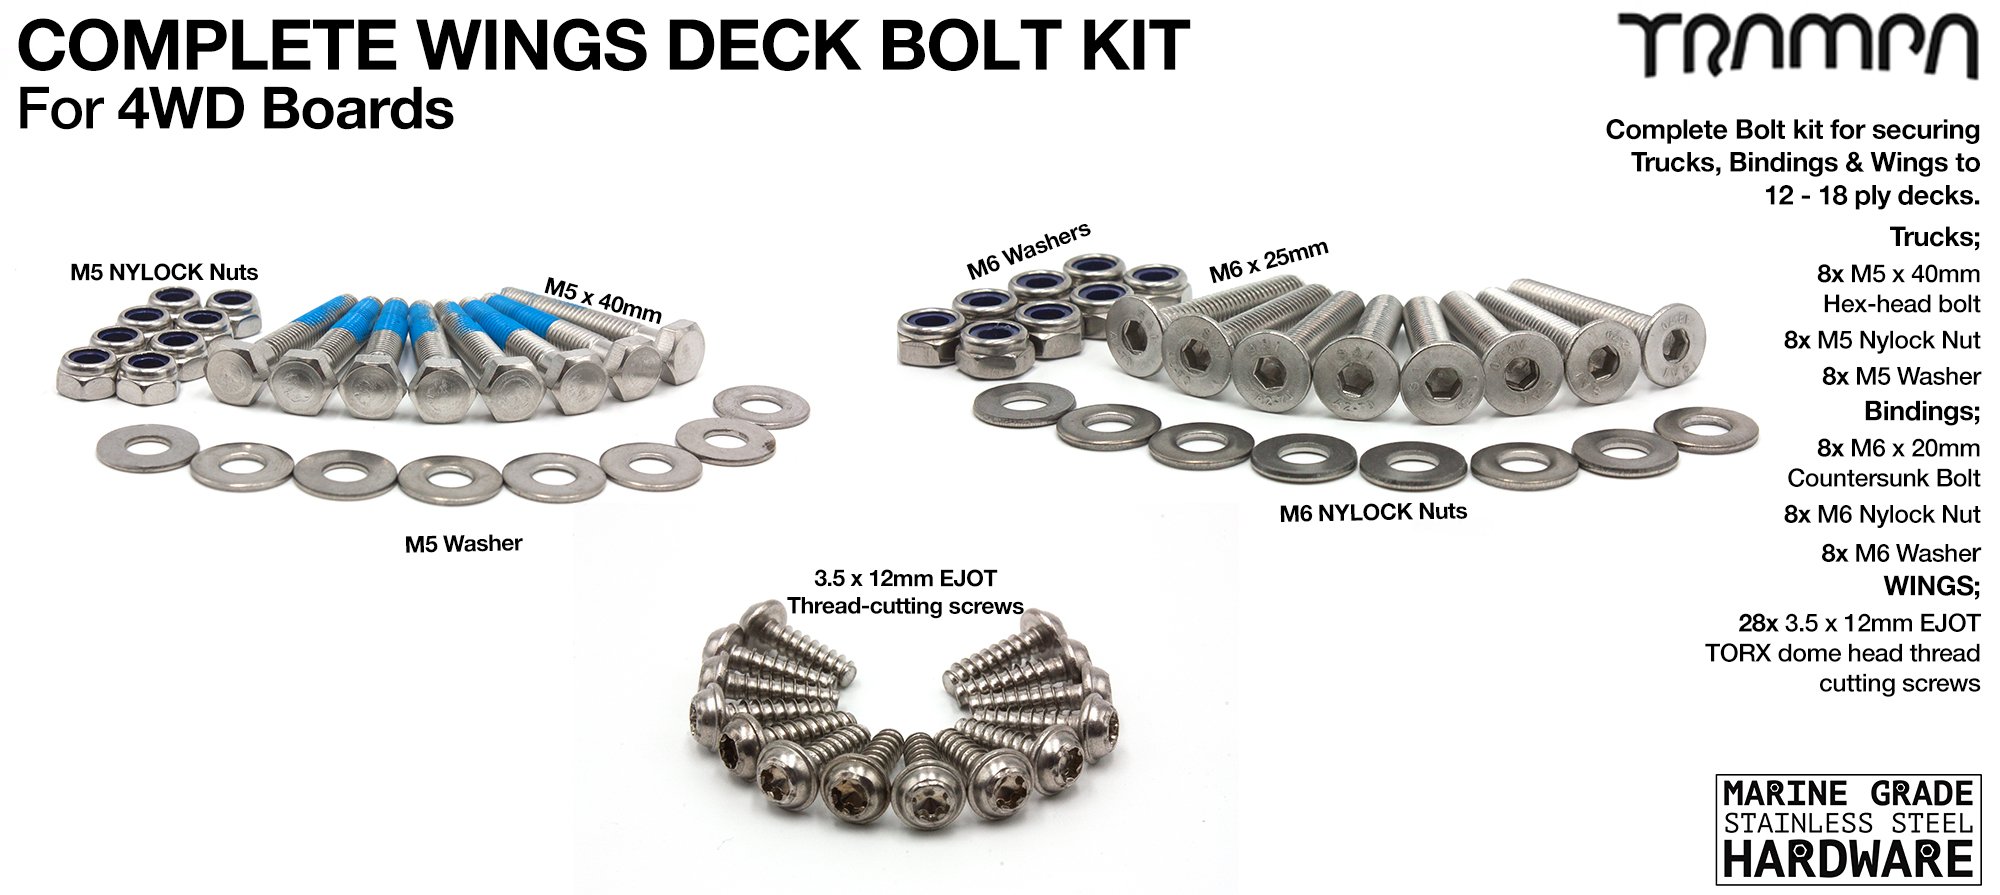 Complete 4WD WING Deck Marine Grade Stainless Steel Bolt Kit - 16/18ply 